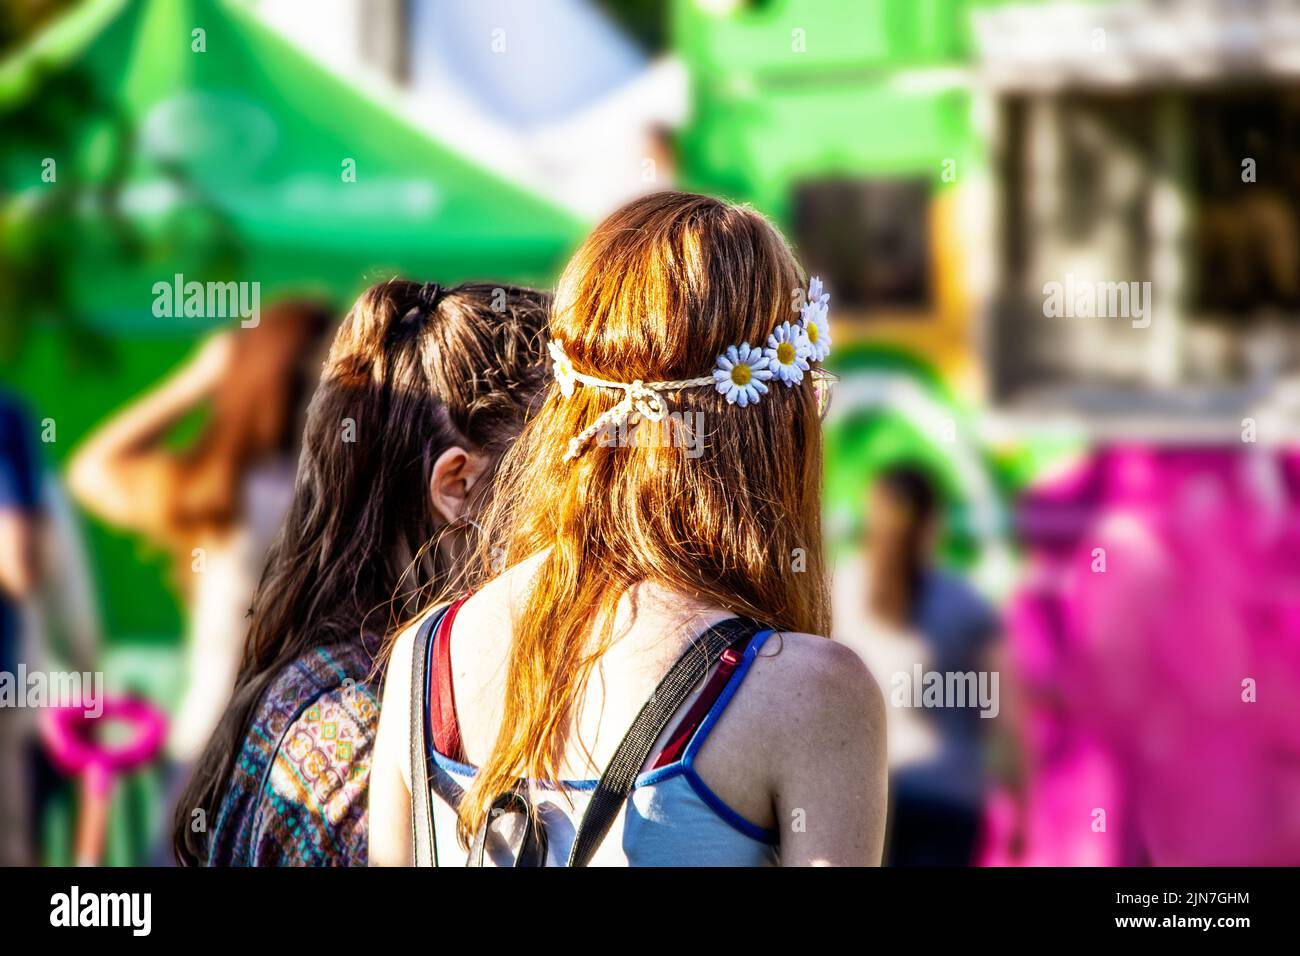 Two girls - one with red hair and daisy headband - wait in line at food truck at carnival - bright colors of pink and green Stock Photo